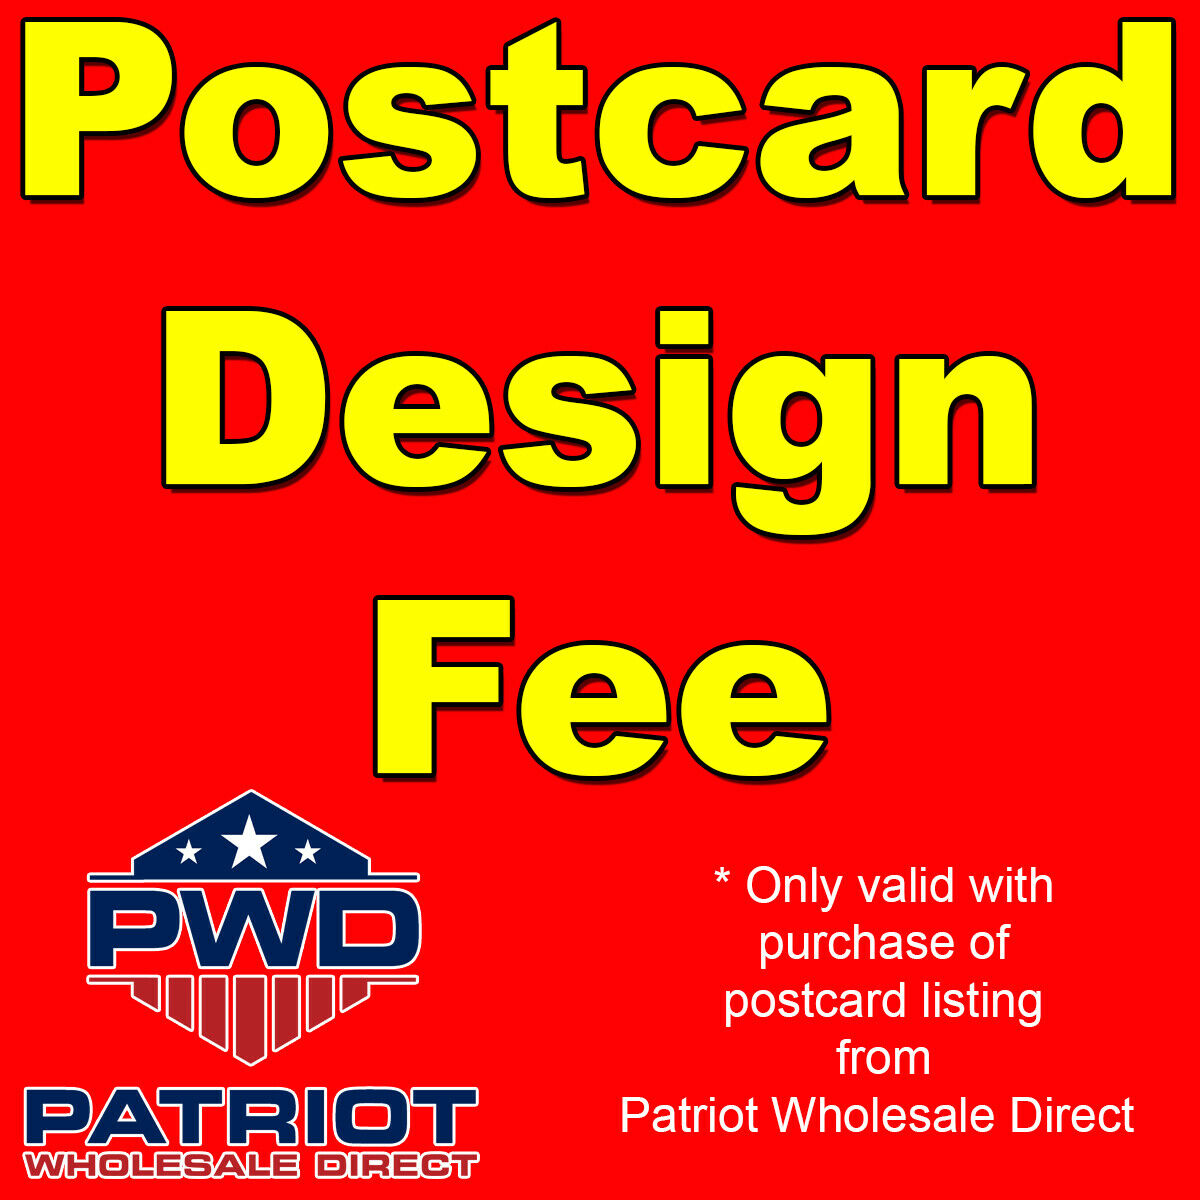 Postcard Design Fee - Only Valid with Postcard Listing Purchase